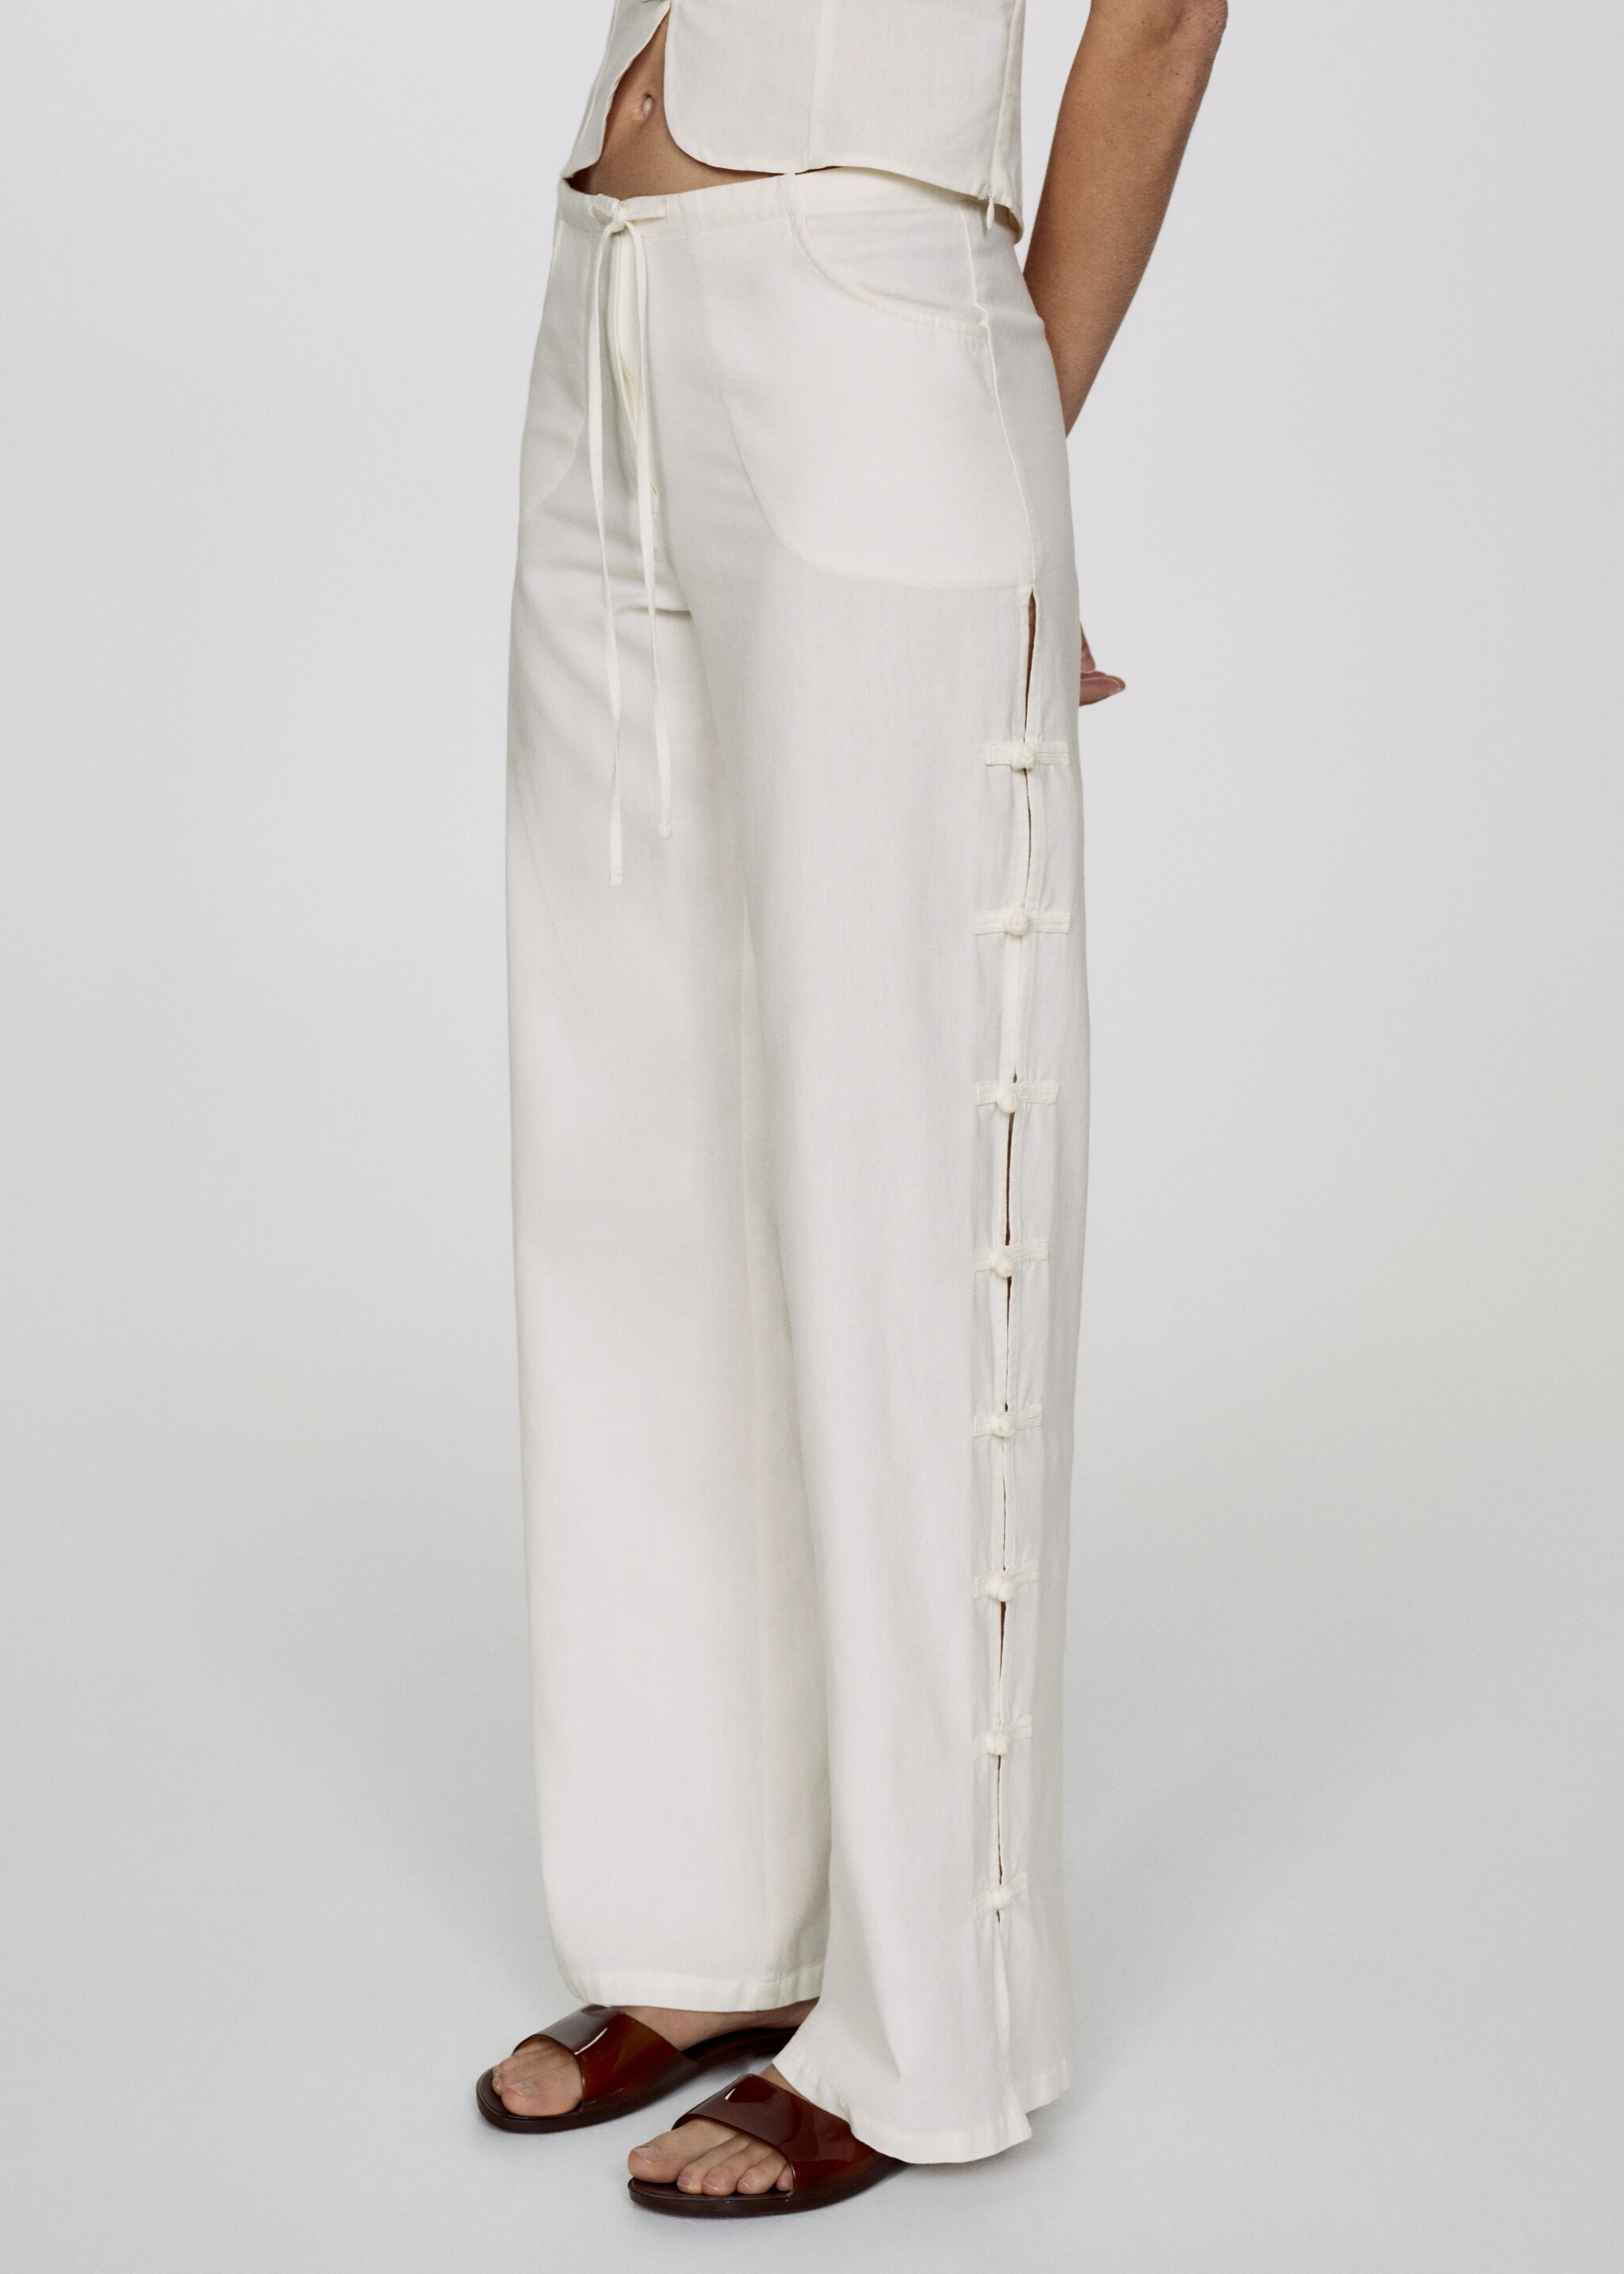 Wideleg trousers with buttons - Medium plane